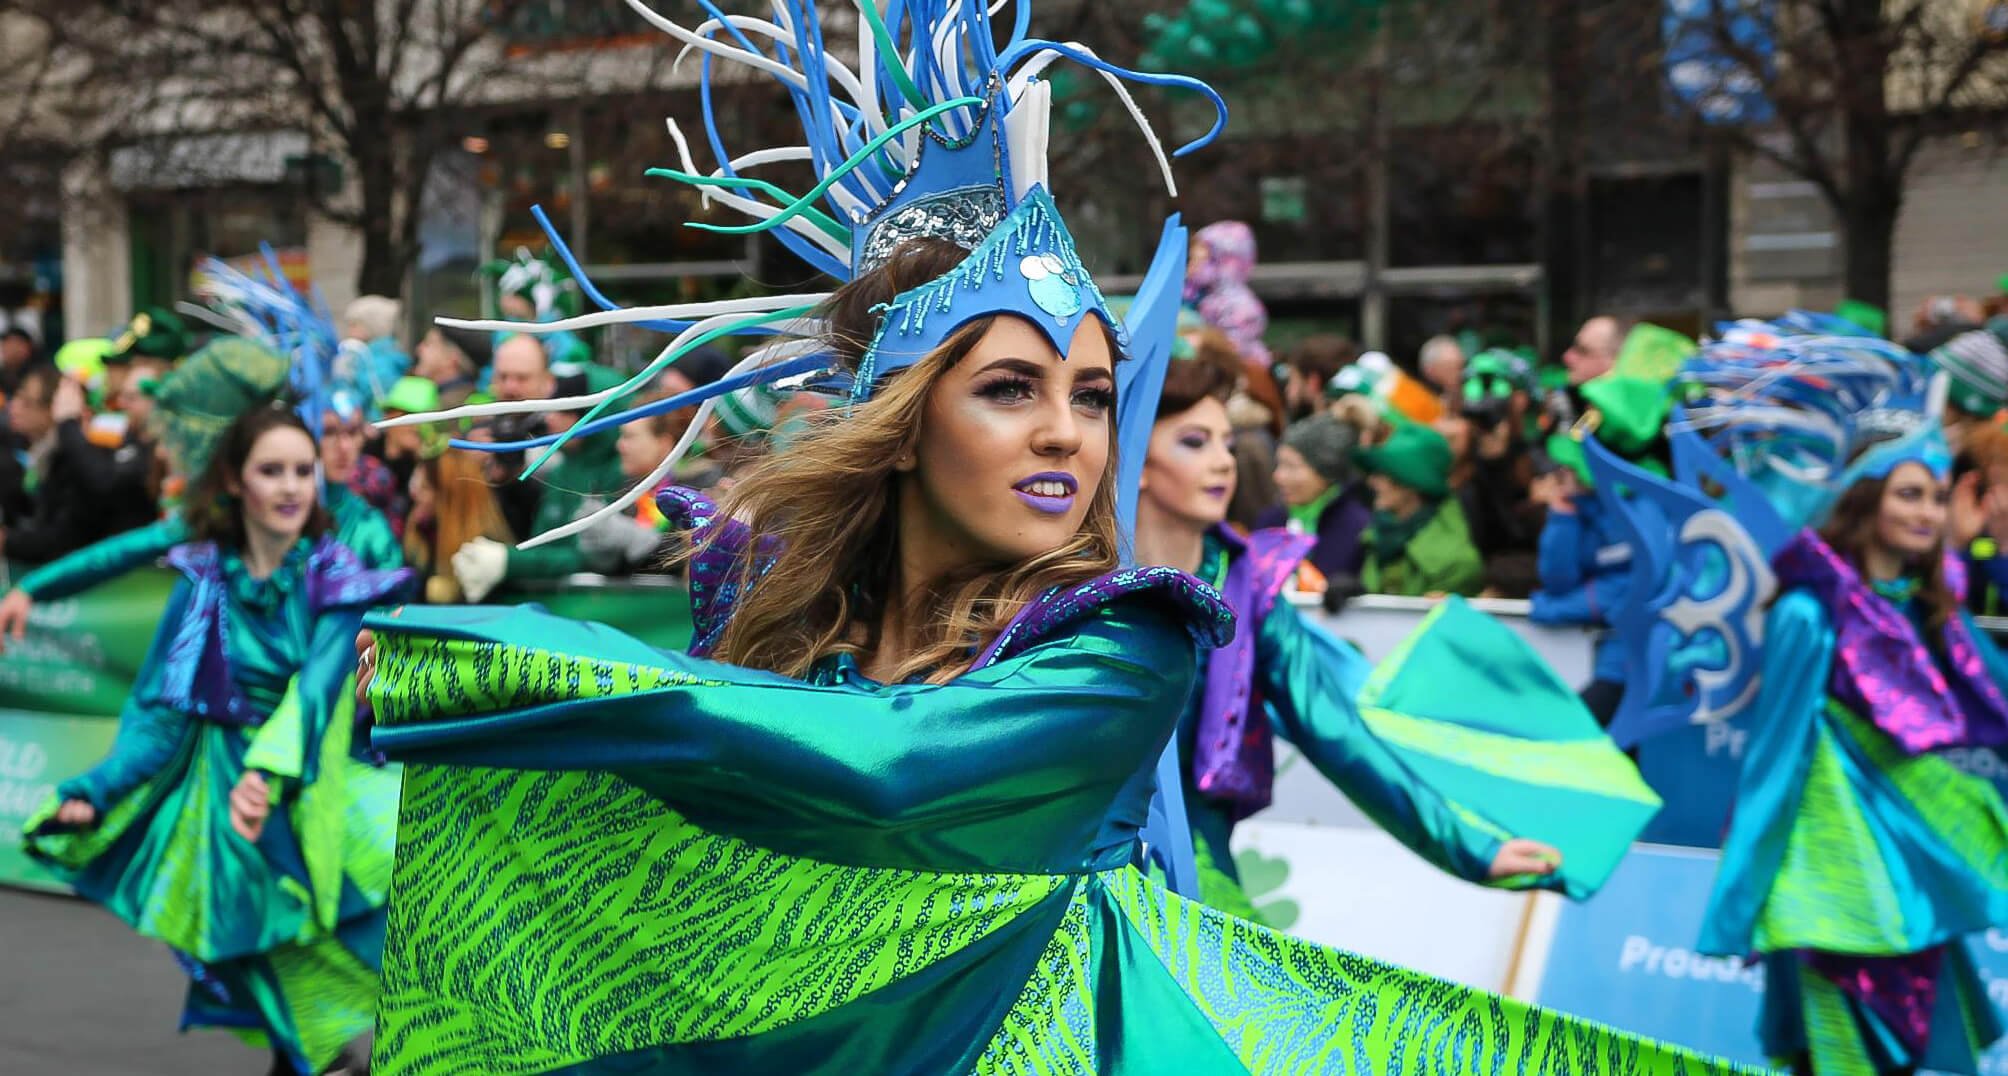 A St Patrick's Festival performs in spring in Ireland